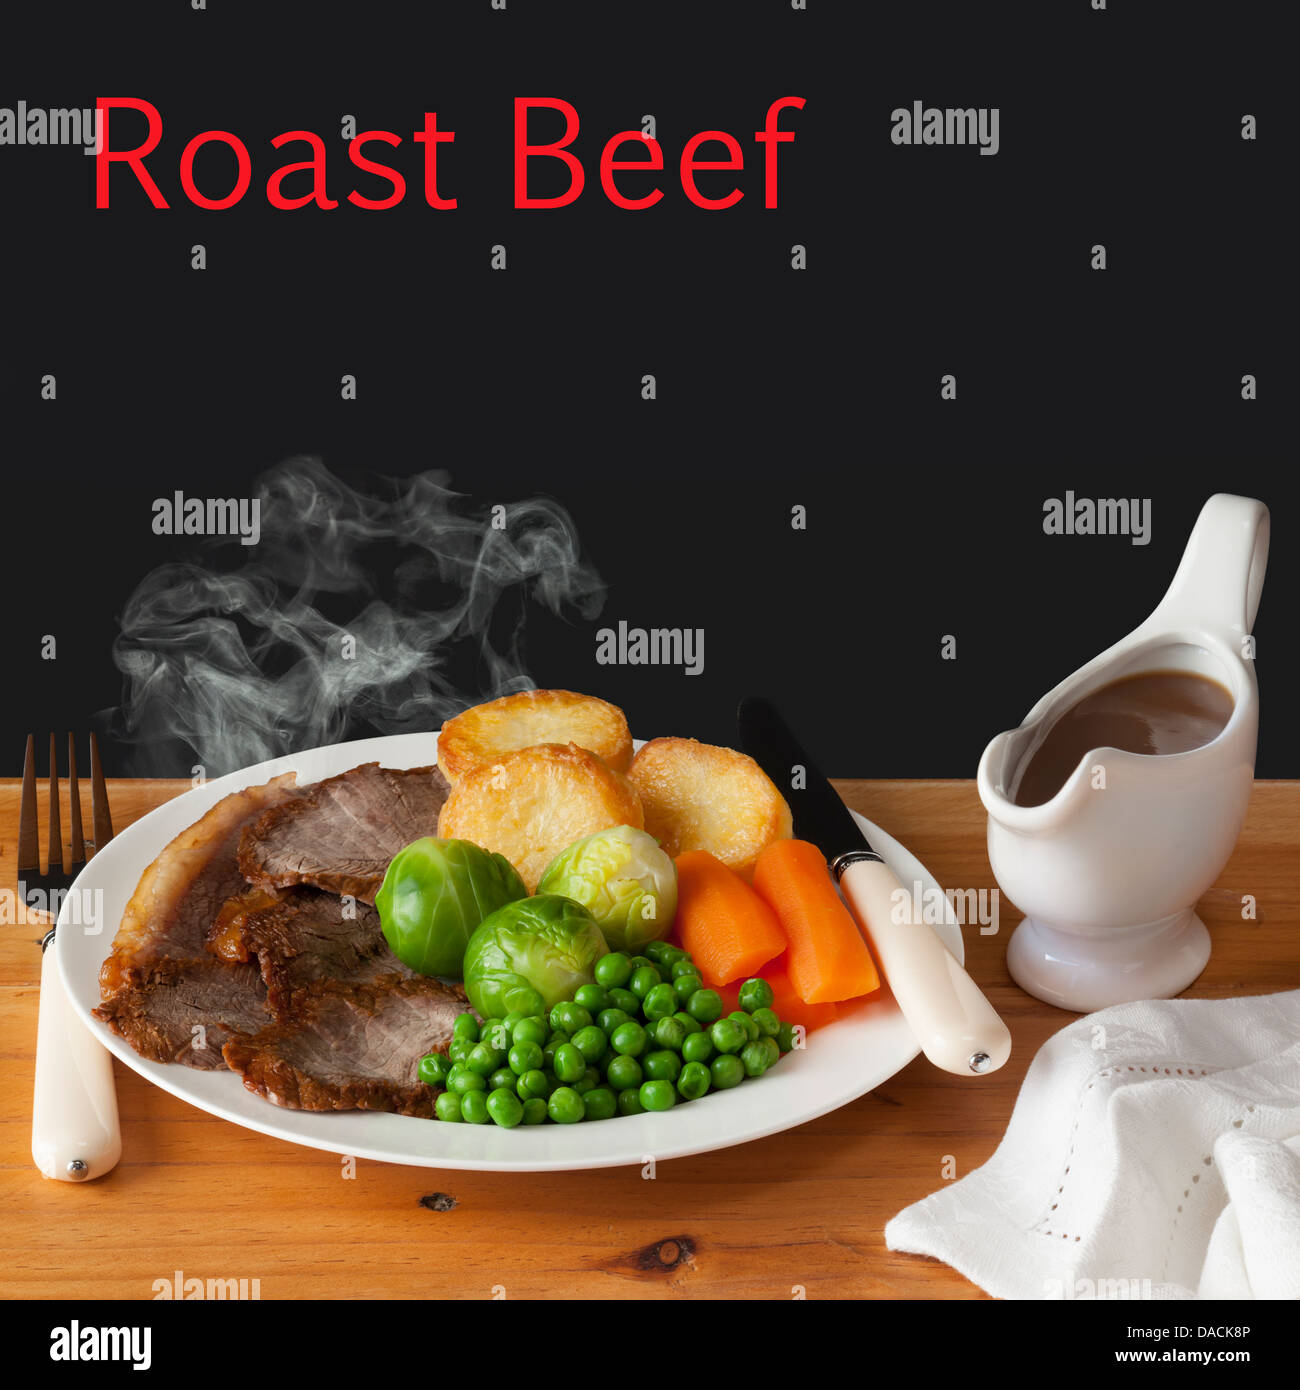 Roast Beef Concept - steaming hot roast beef with roast potatoes, brussels sprouts, carrots, peas and a jug of gravy... Stock Photo